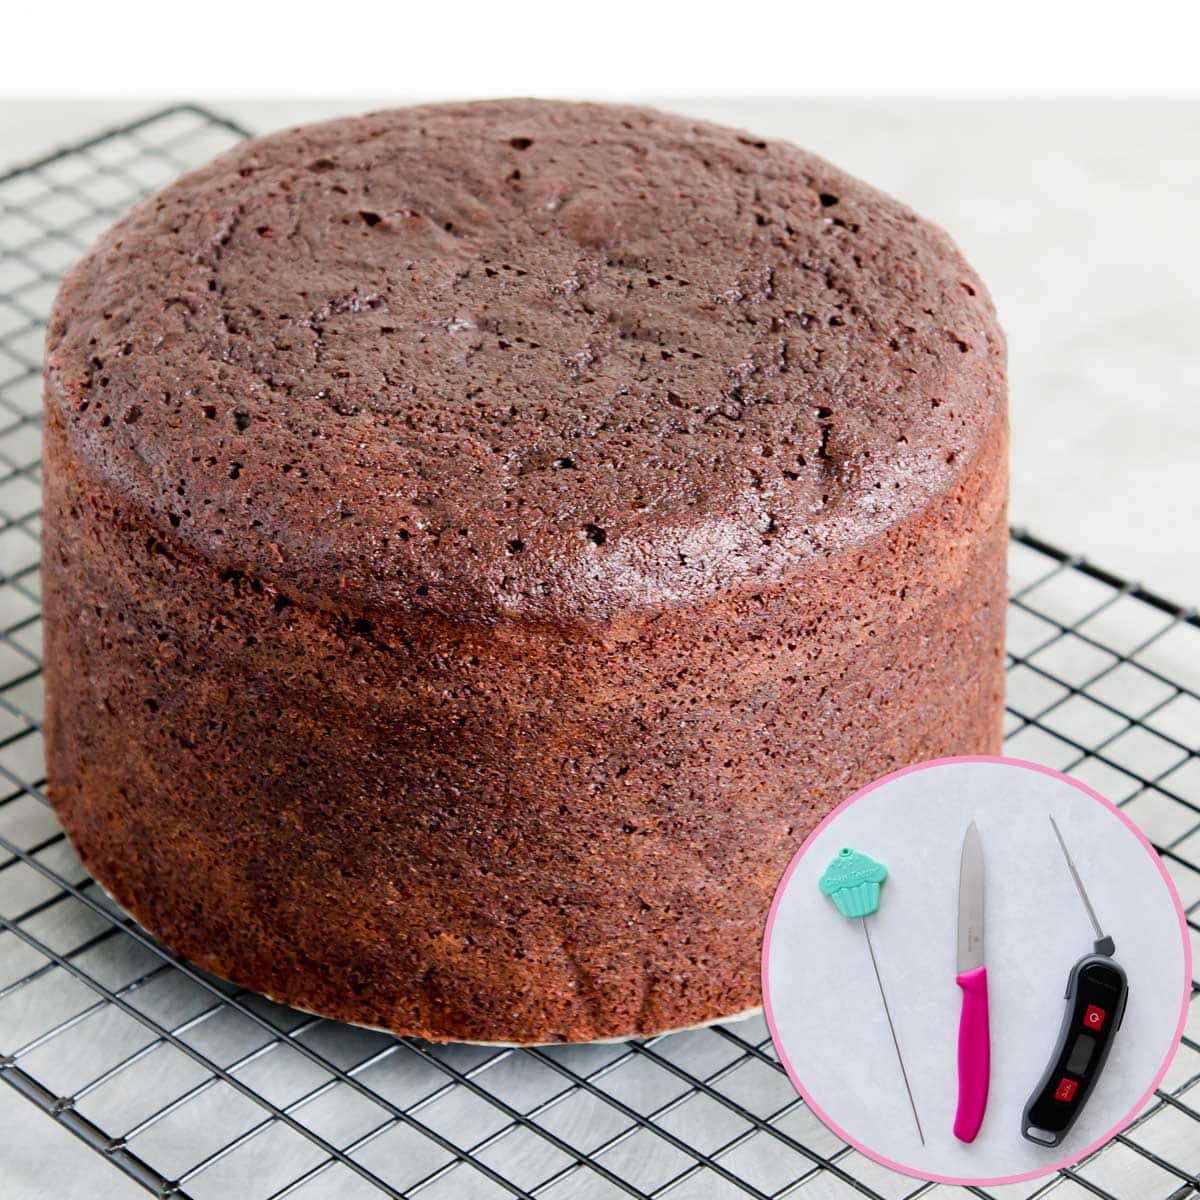 How to check if your cake is done baking - The Bake School